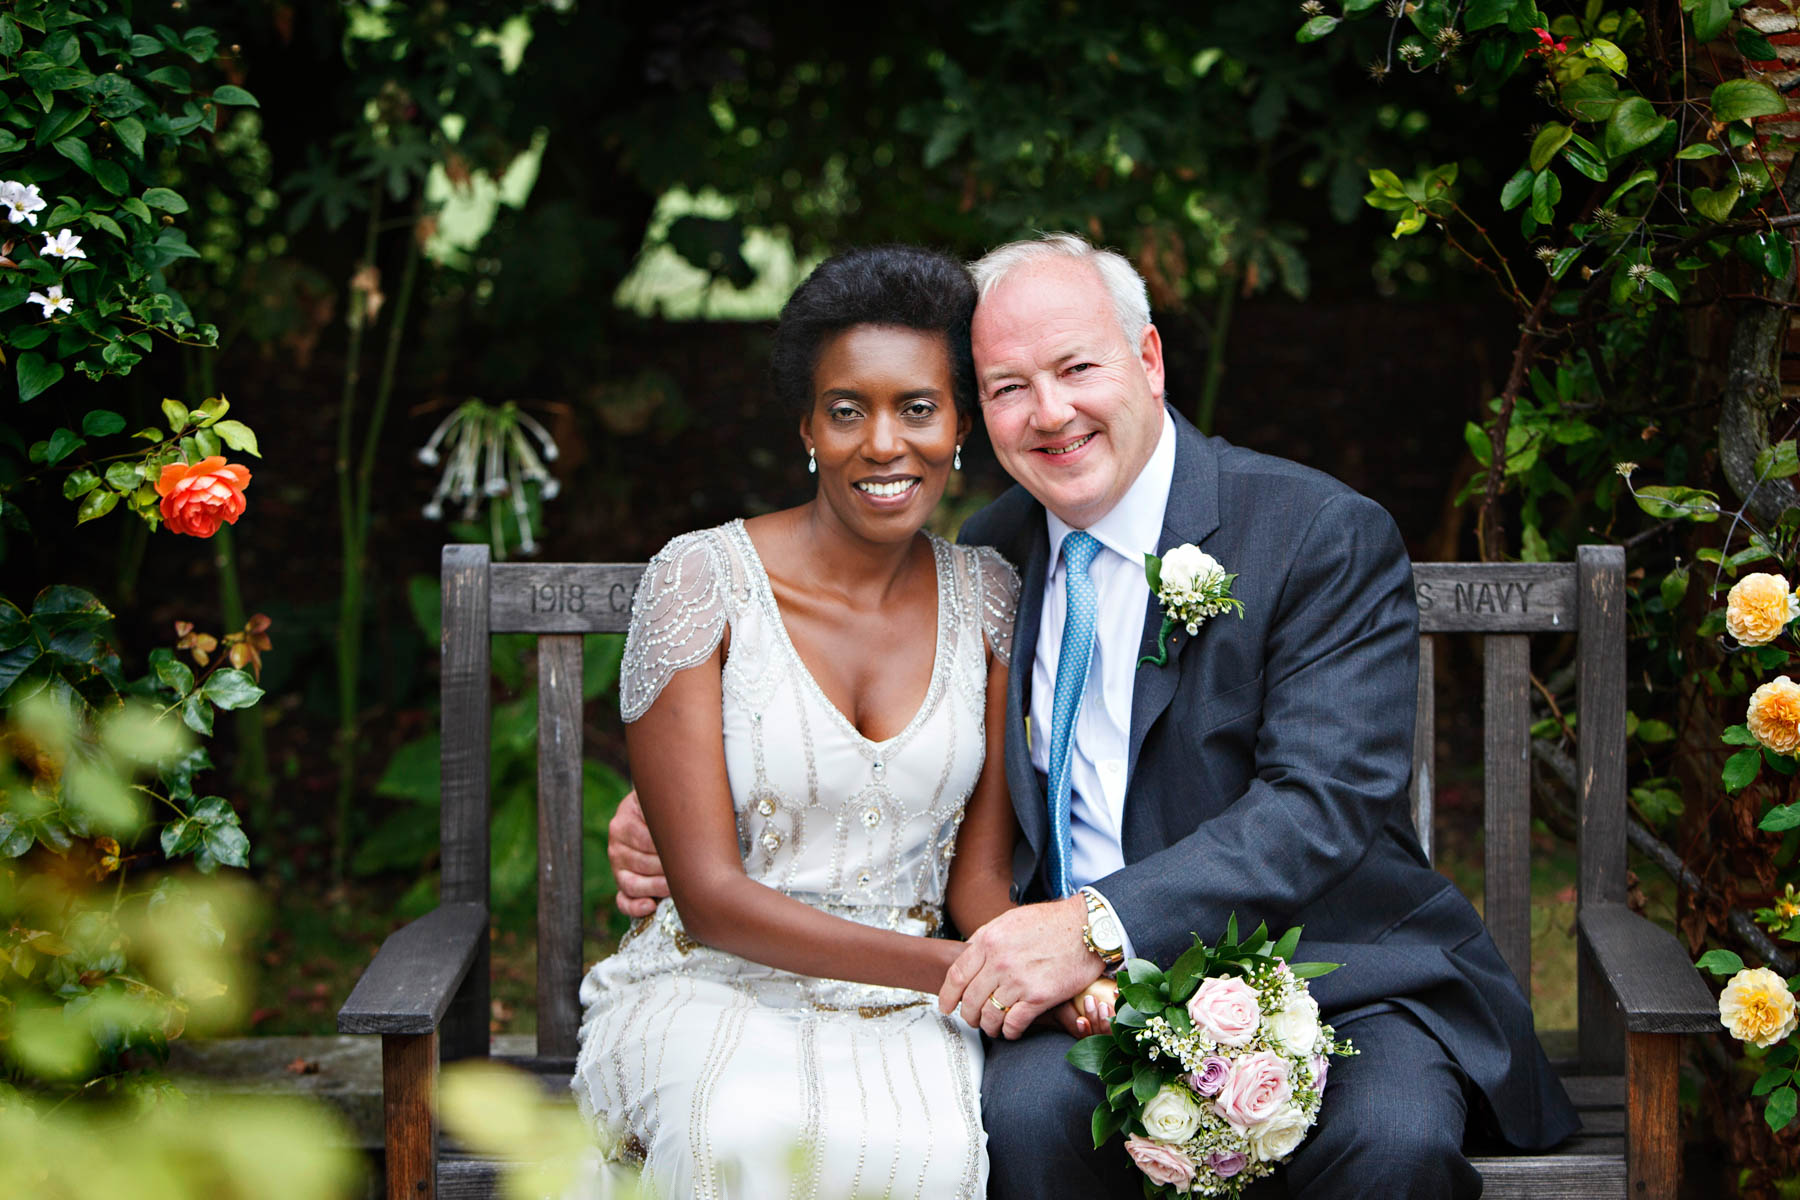 A bride and groom celebrate their Chelsea Old Town Hall Wedding at the super famous Hurlingham Club. They are photographed during their wedding portrait session, sitting on a bench in the landscaped gardens of the Hurlingham Club.